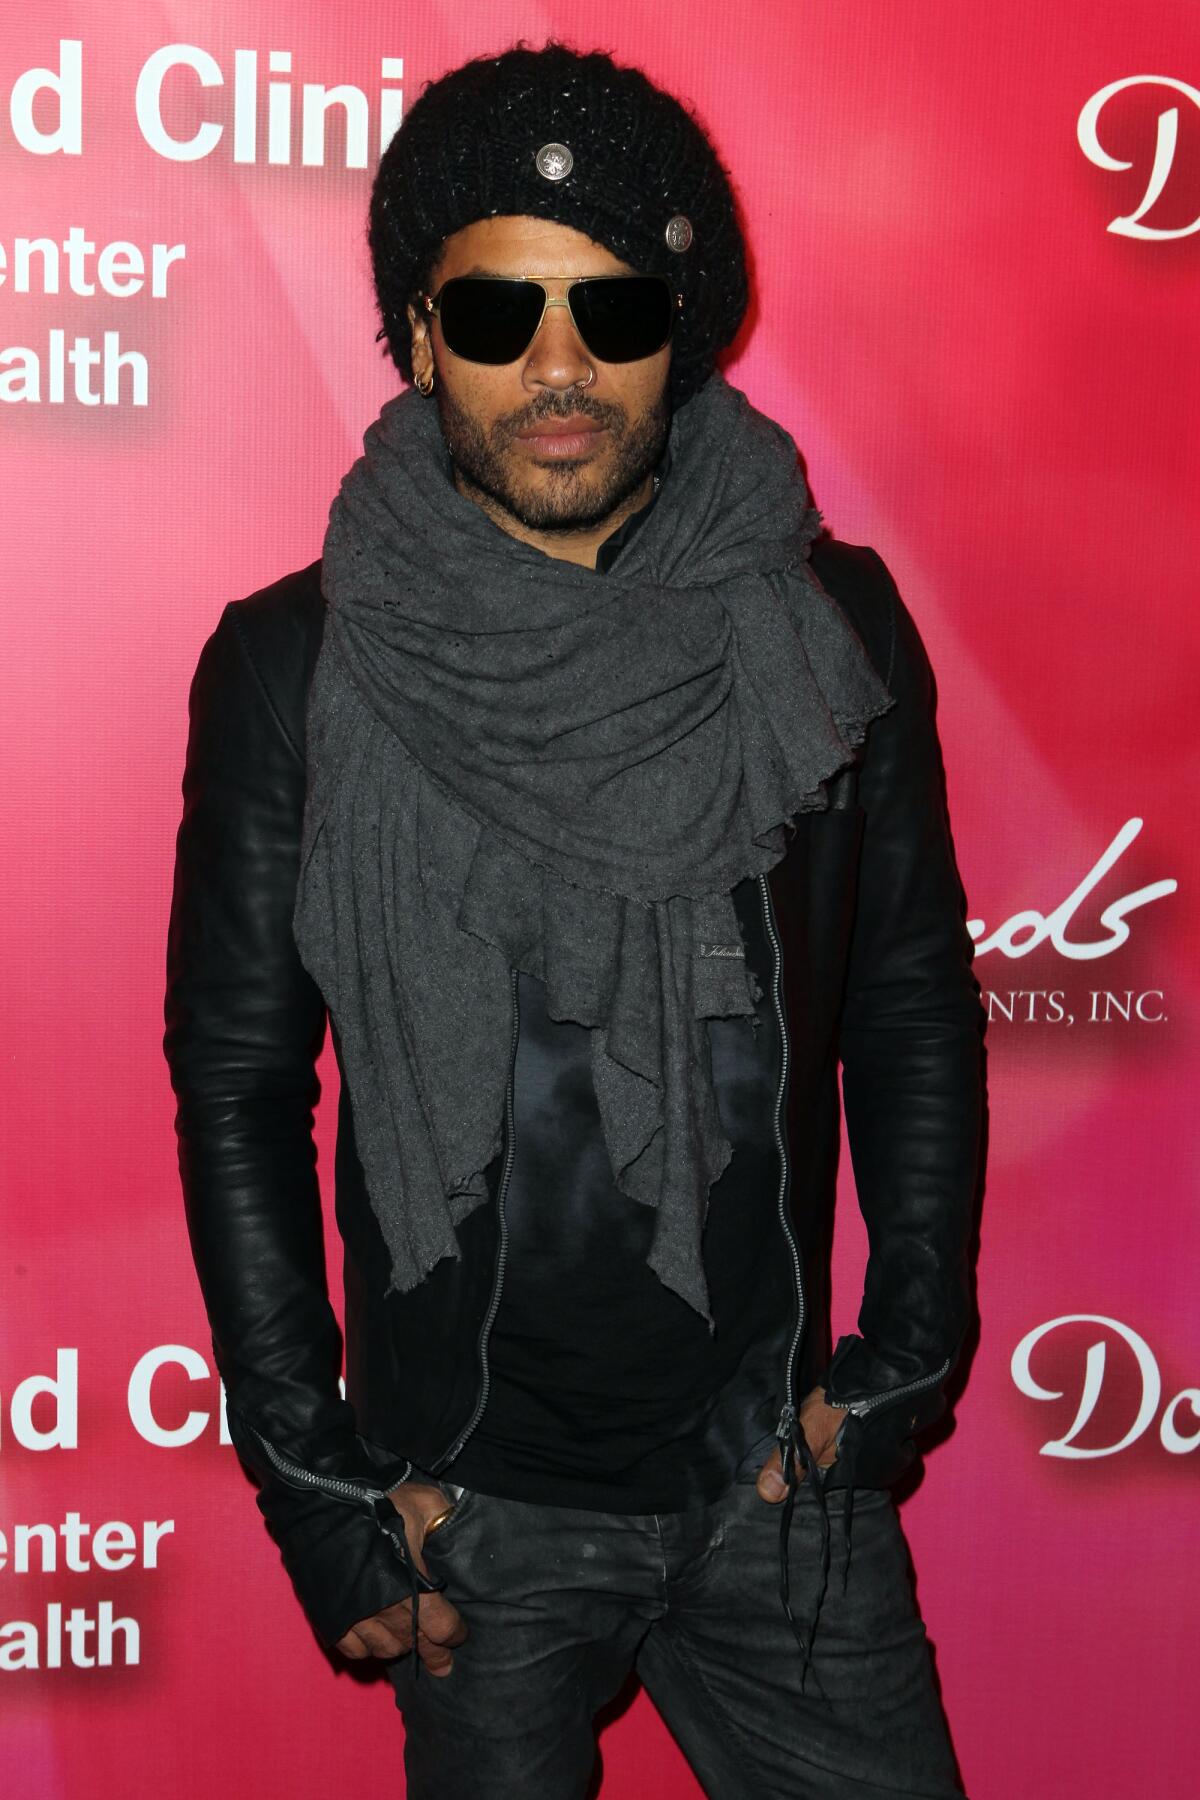 Lenny Kravitz in sunglasses, beret, Jacket with zippers and a large scarf.